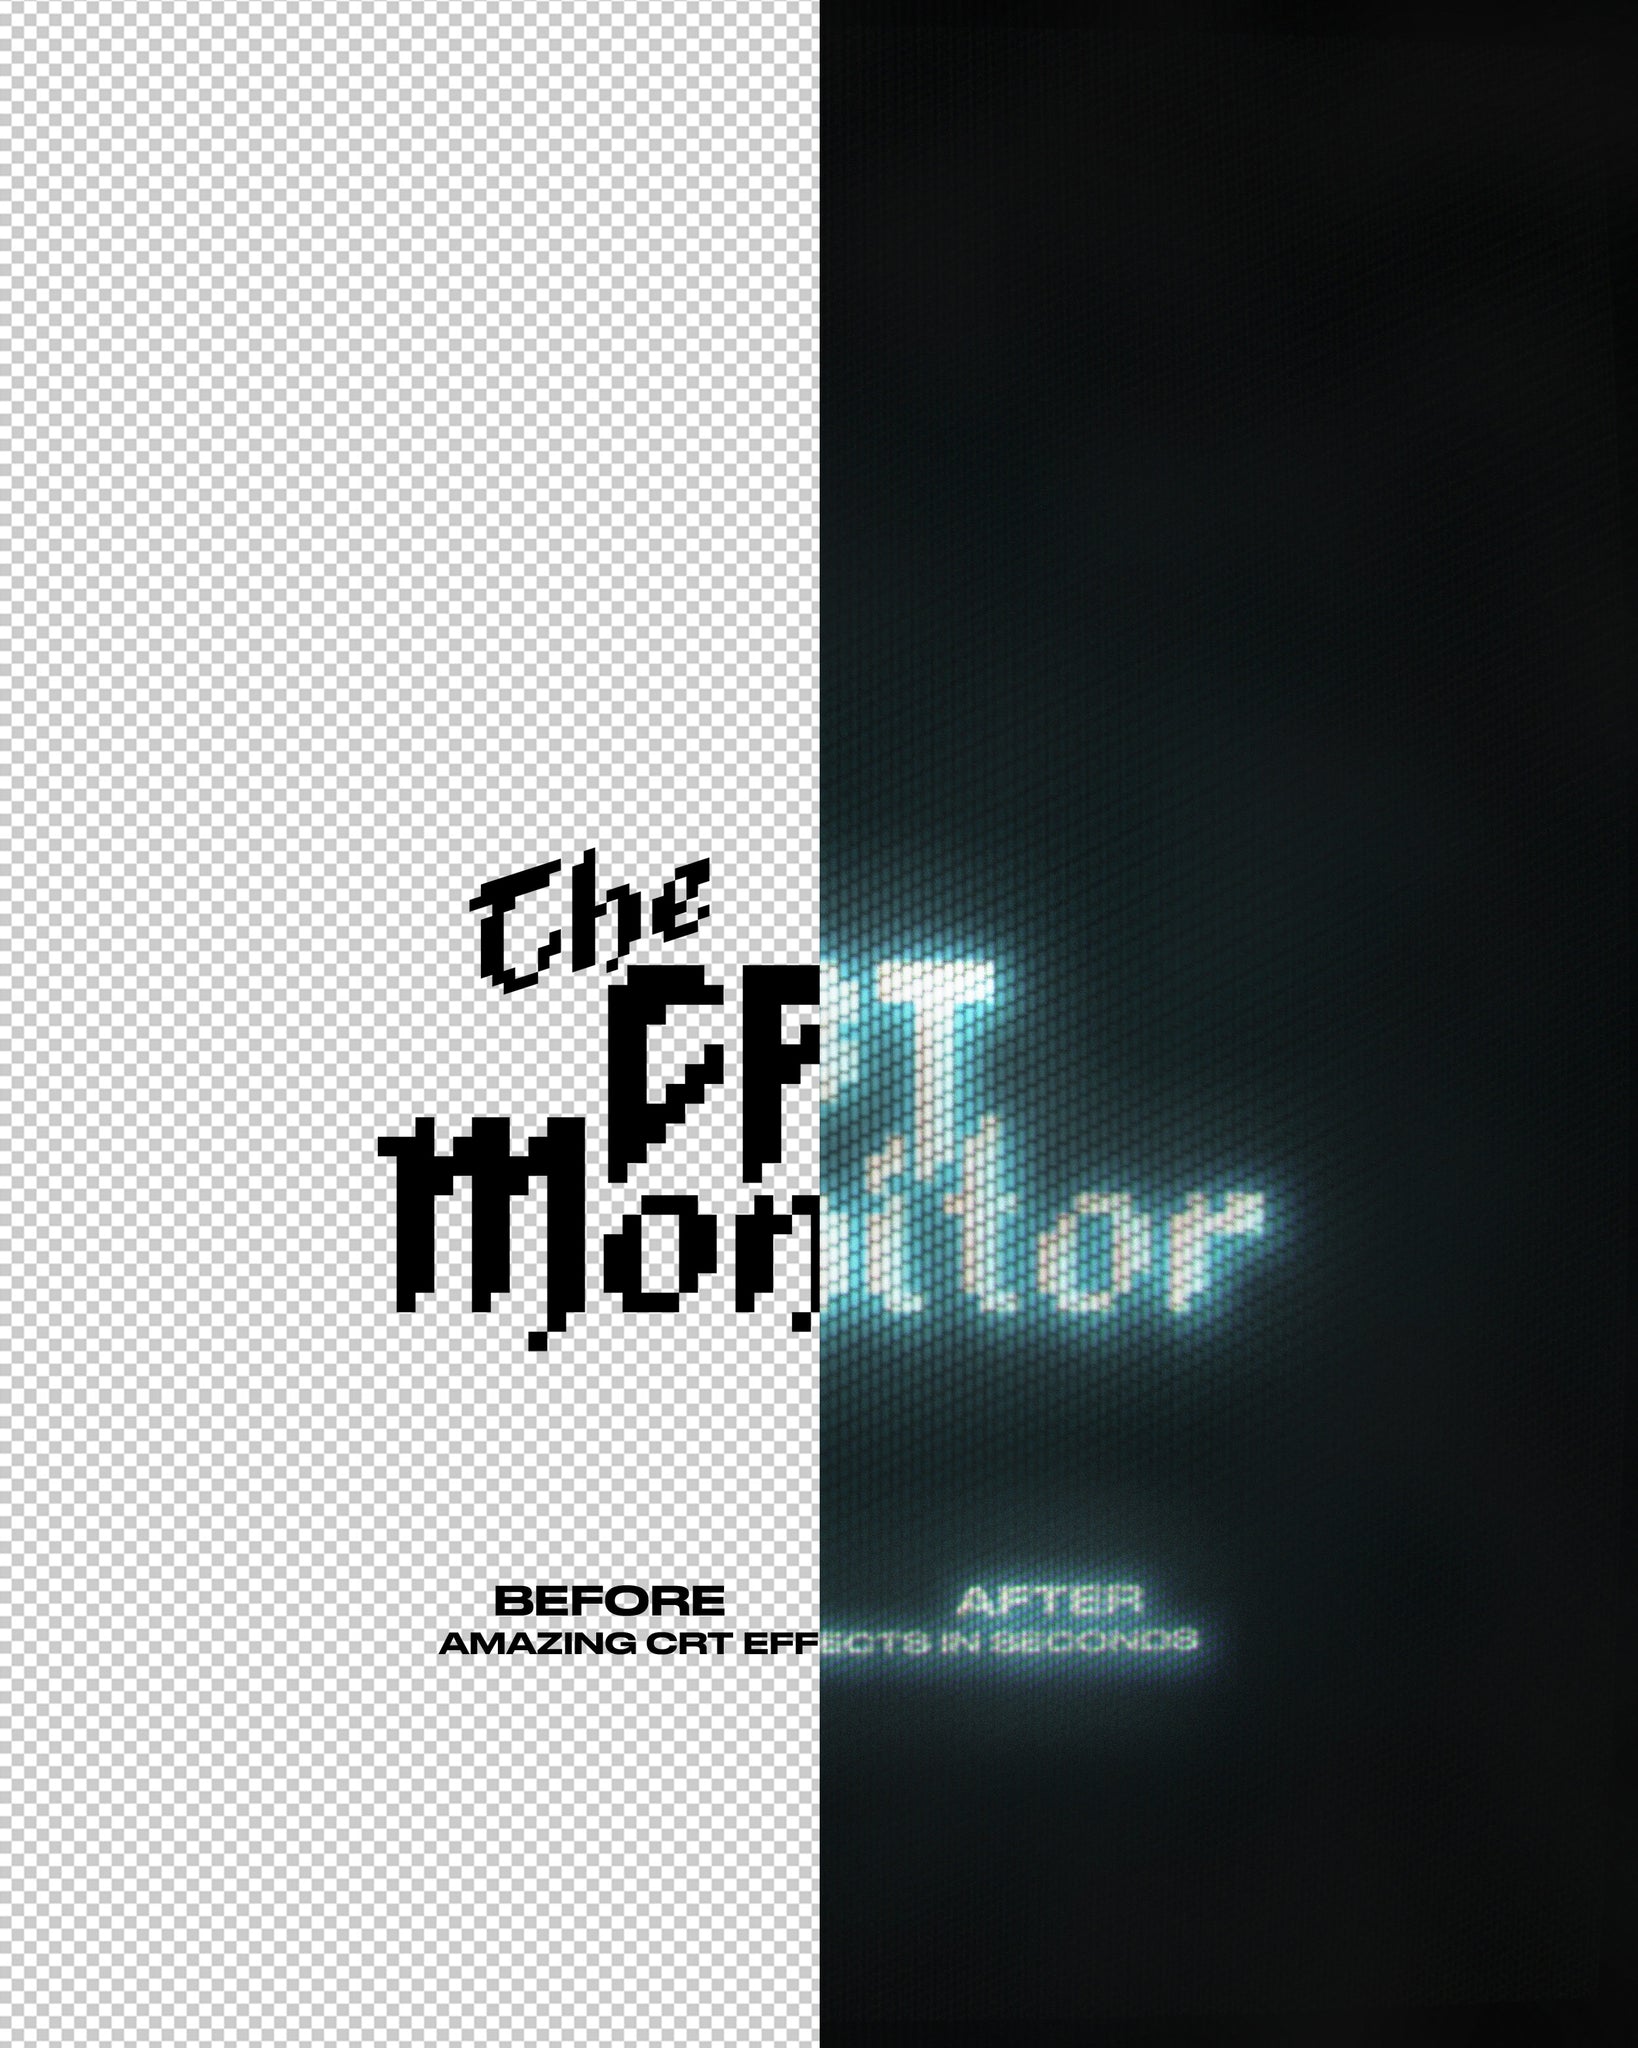 The CRT Monitor